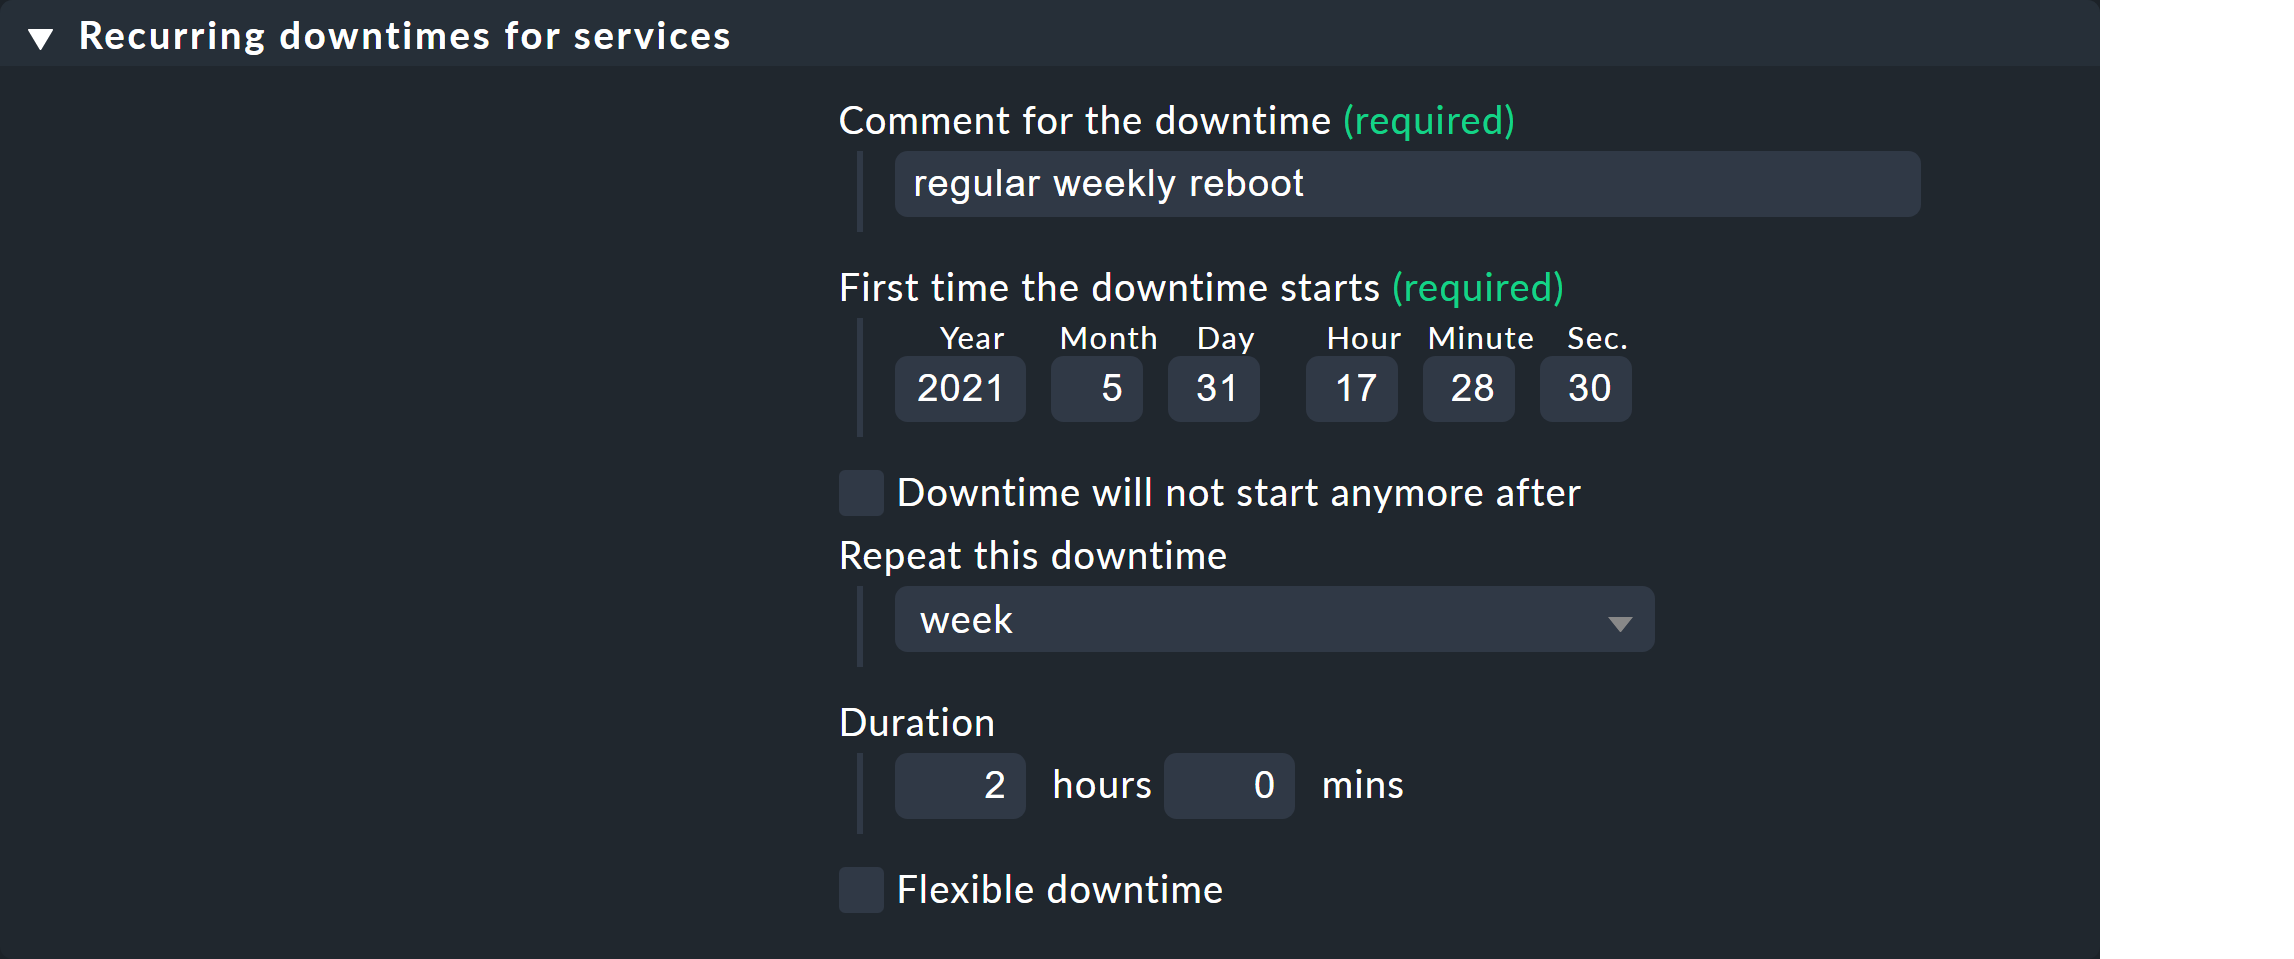 basics downtimes recurring rule